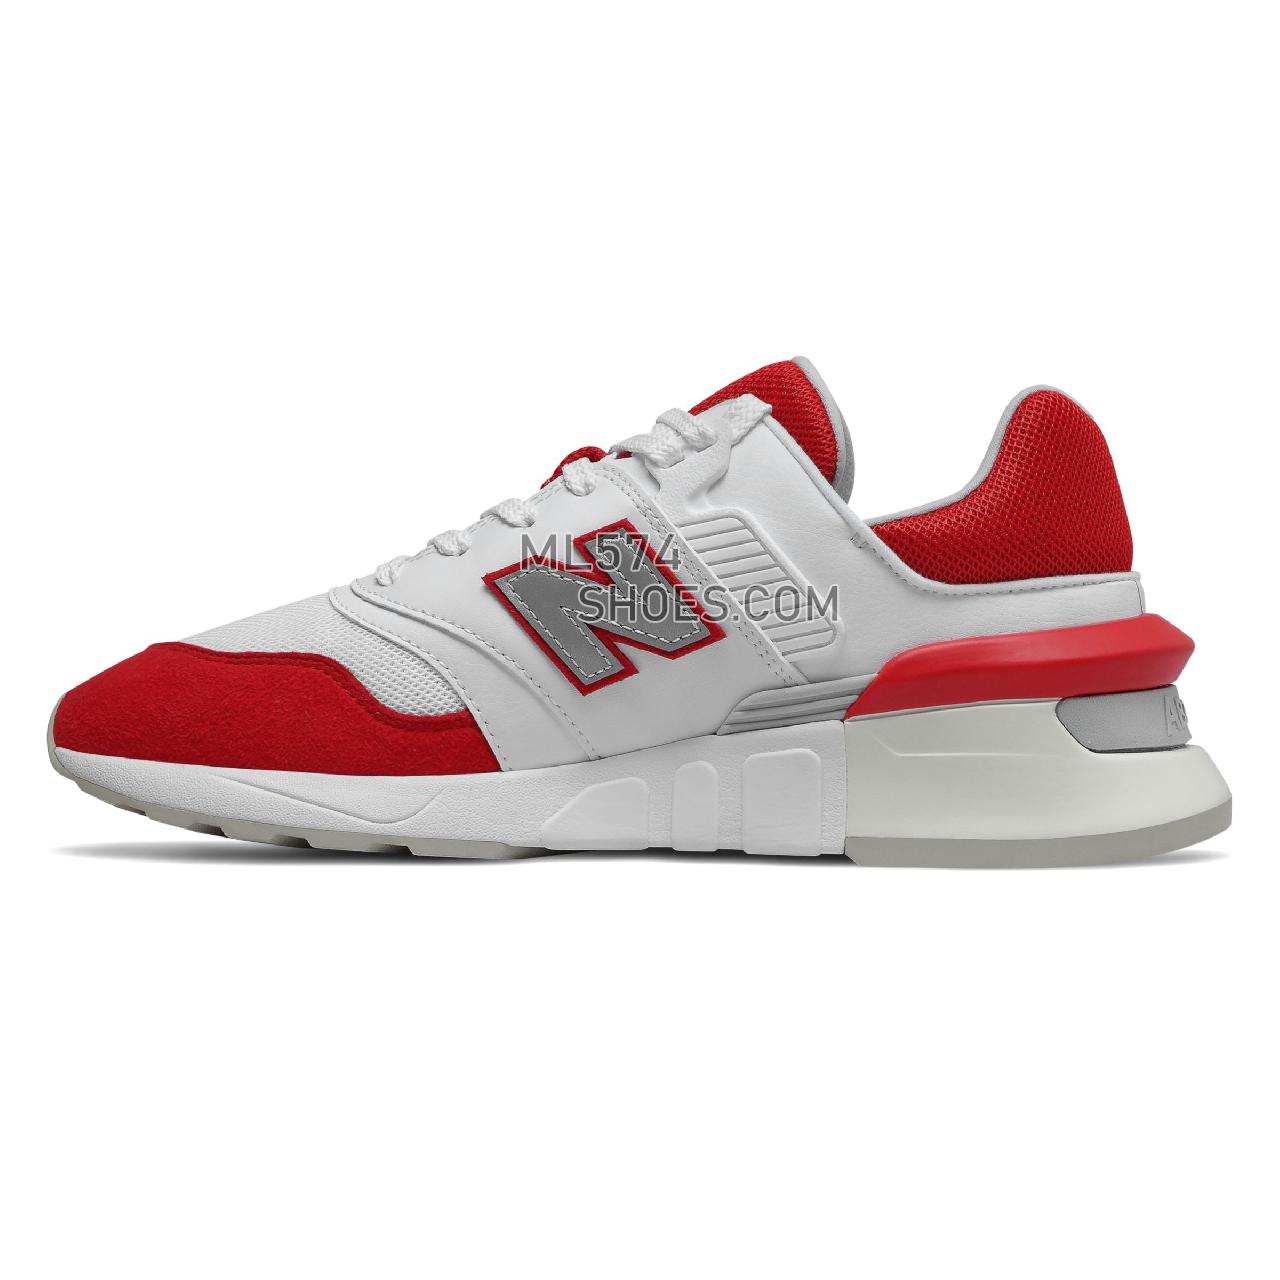 New Balance 997 Sport - Men's Sport Style Sneakers - Munsell White with Team Red - MS997LOJ